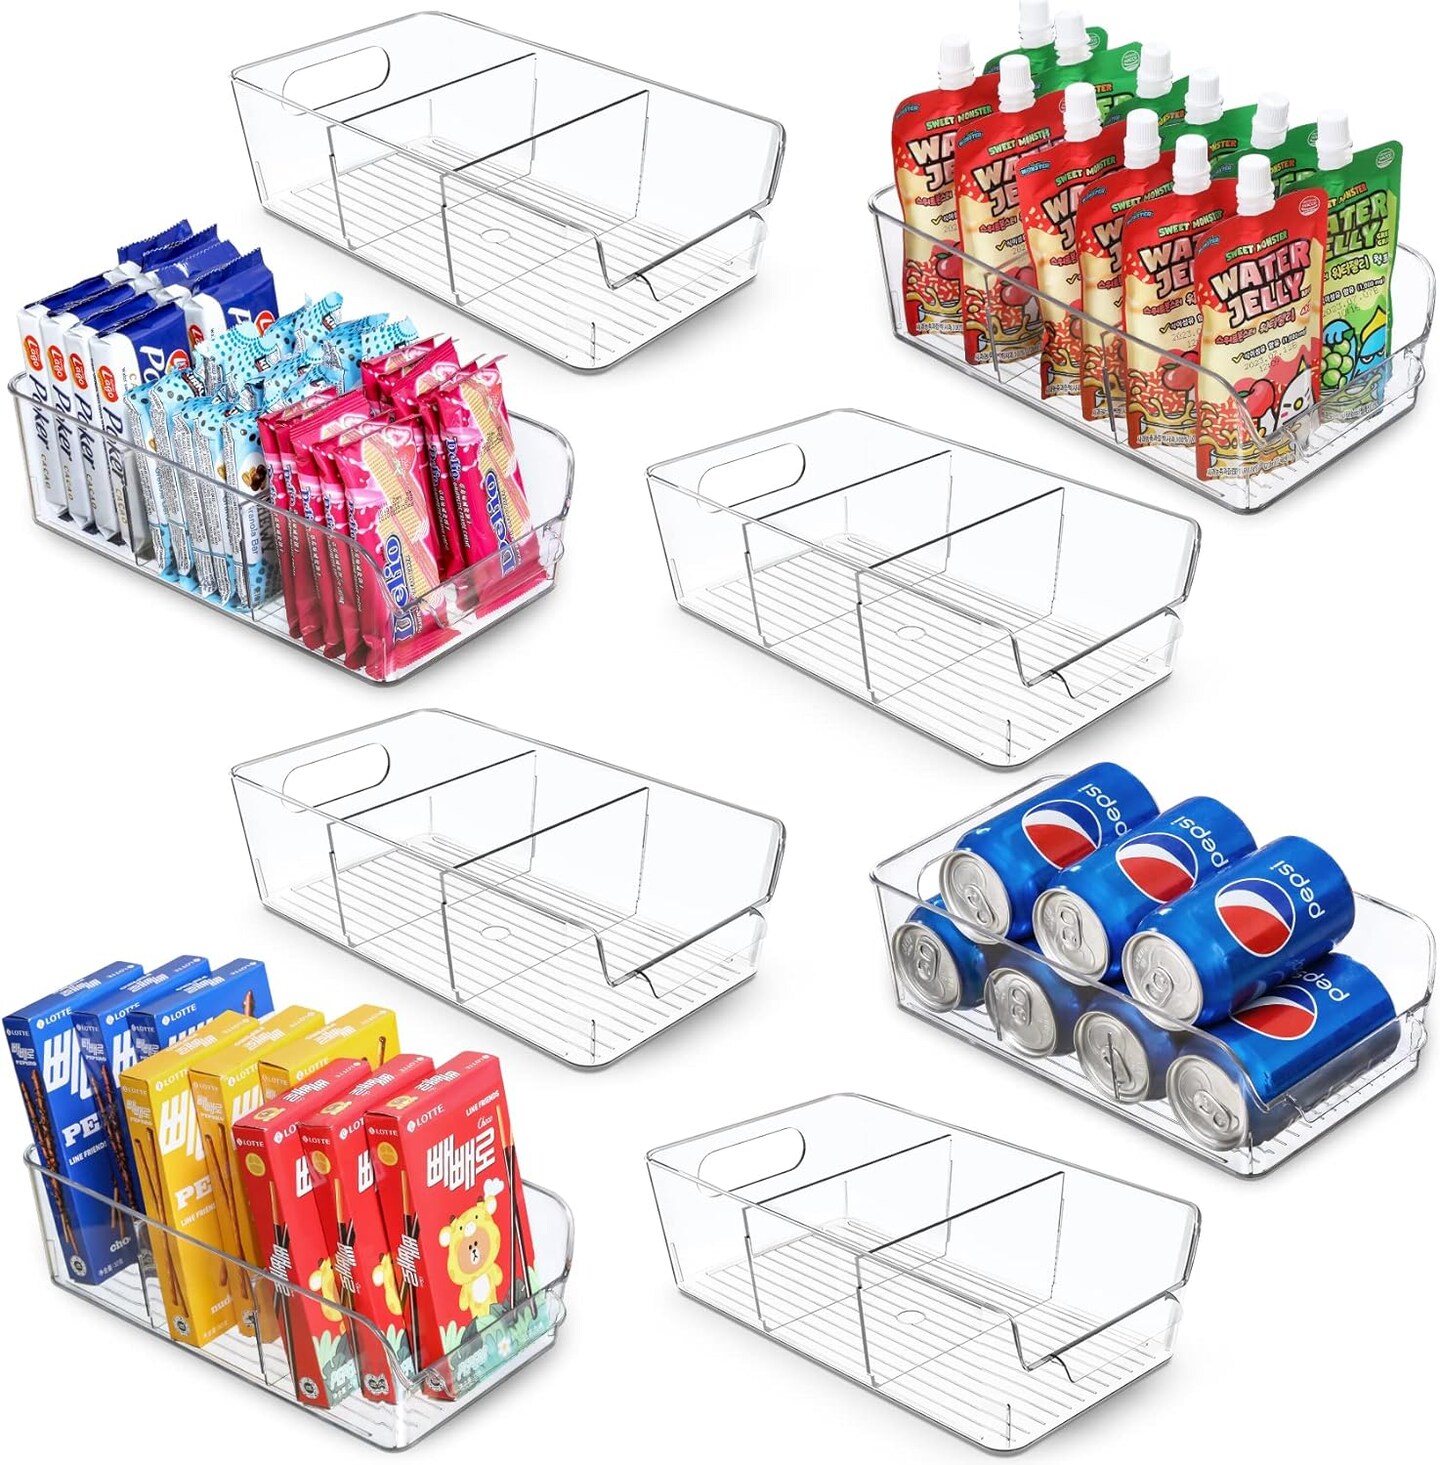 2 Pack Can Organizer Stackable Food Storage Holder Kitchen Cabinet Pantry  Rack